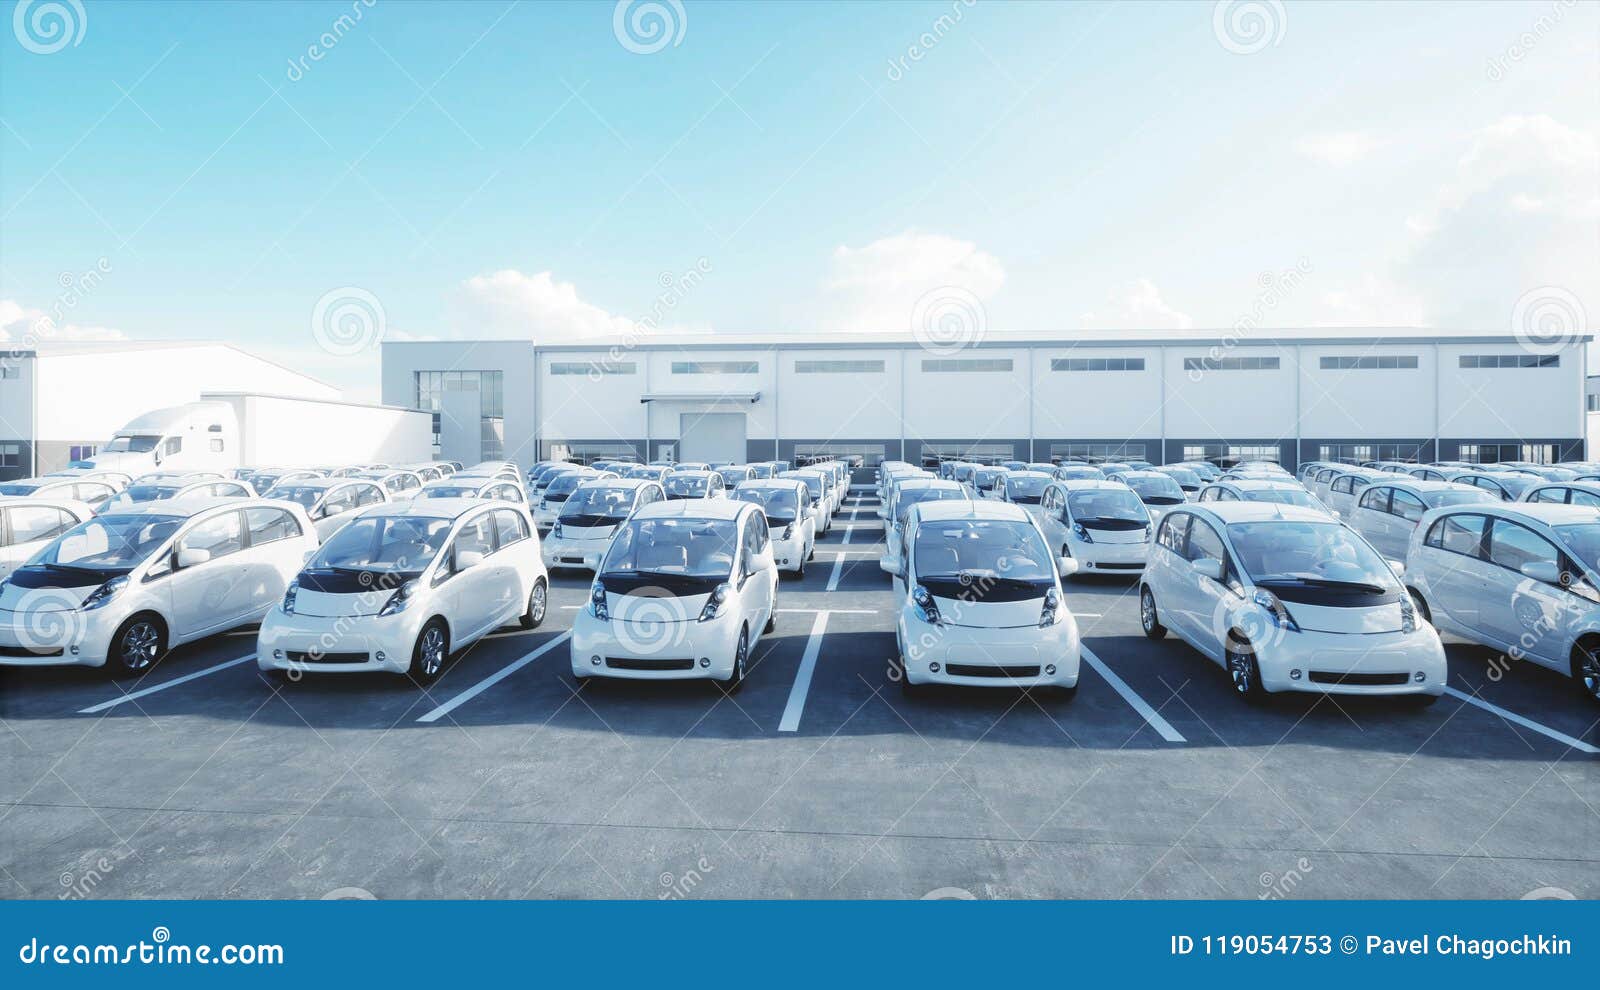 3d model of electric new cars in stock. car dealership cars for sale. ecology concept. 3d rendering.